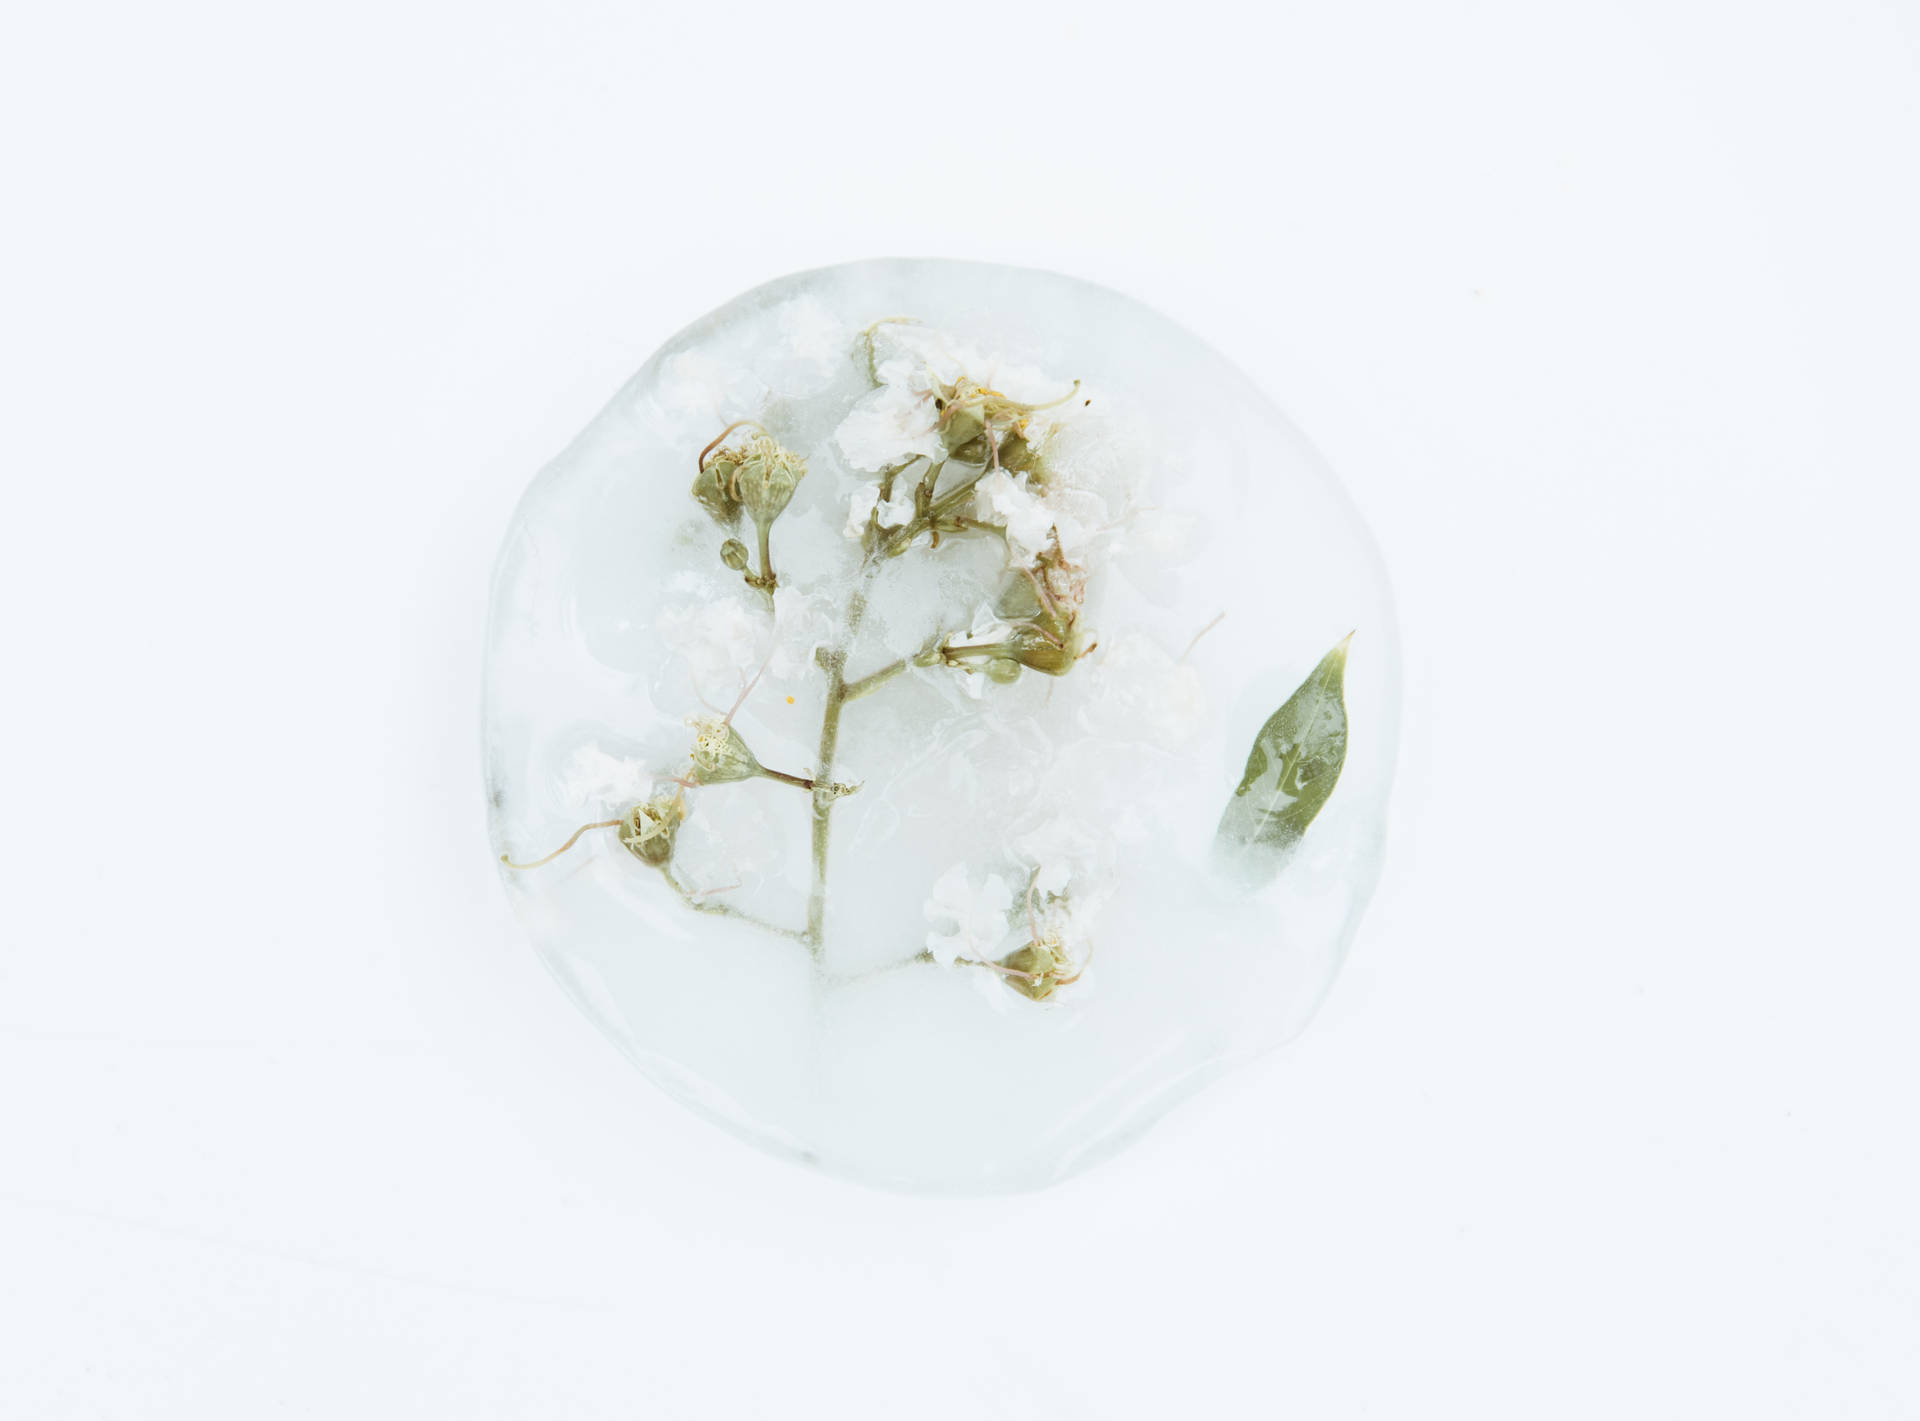 Dried Flowers In White Background Background